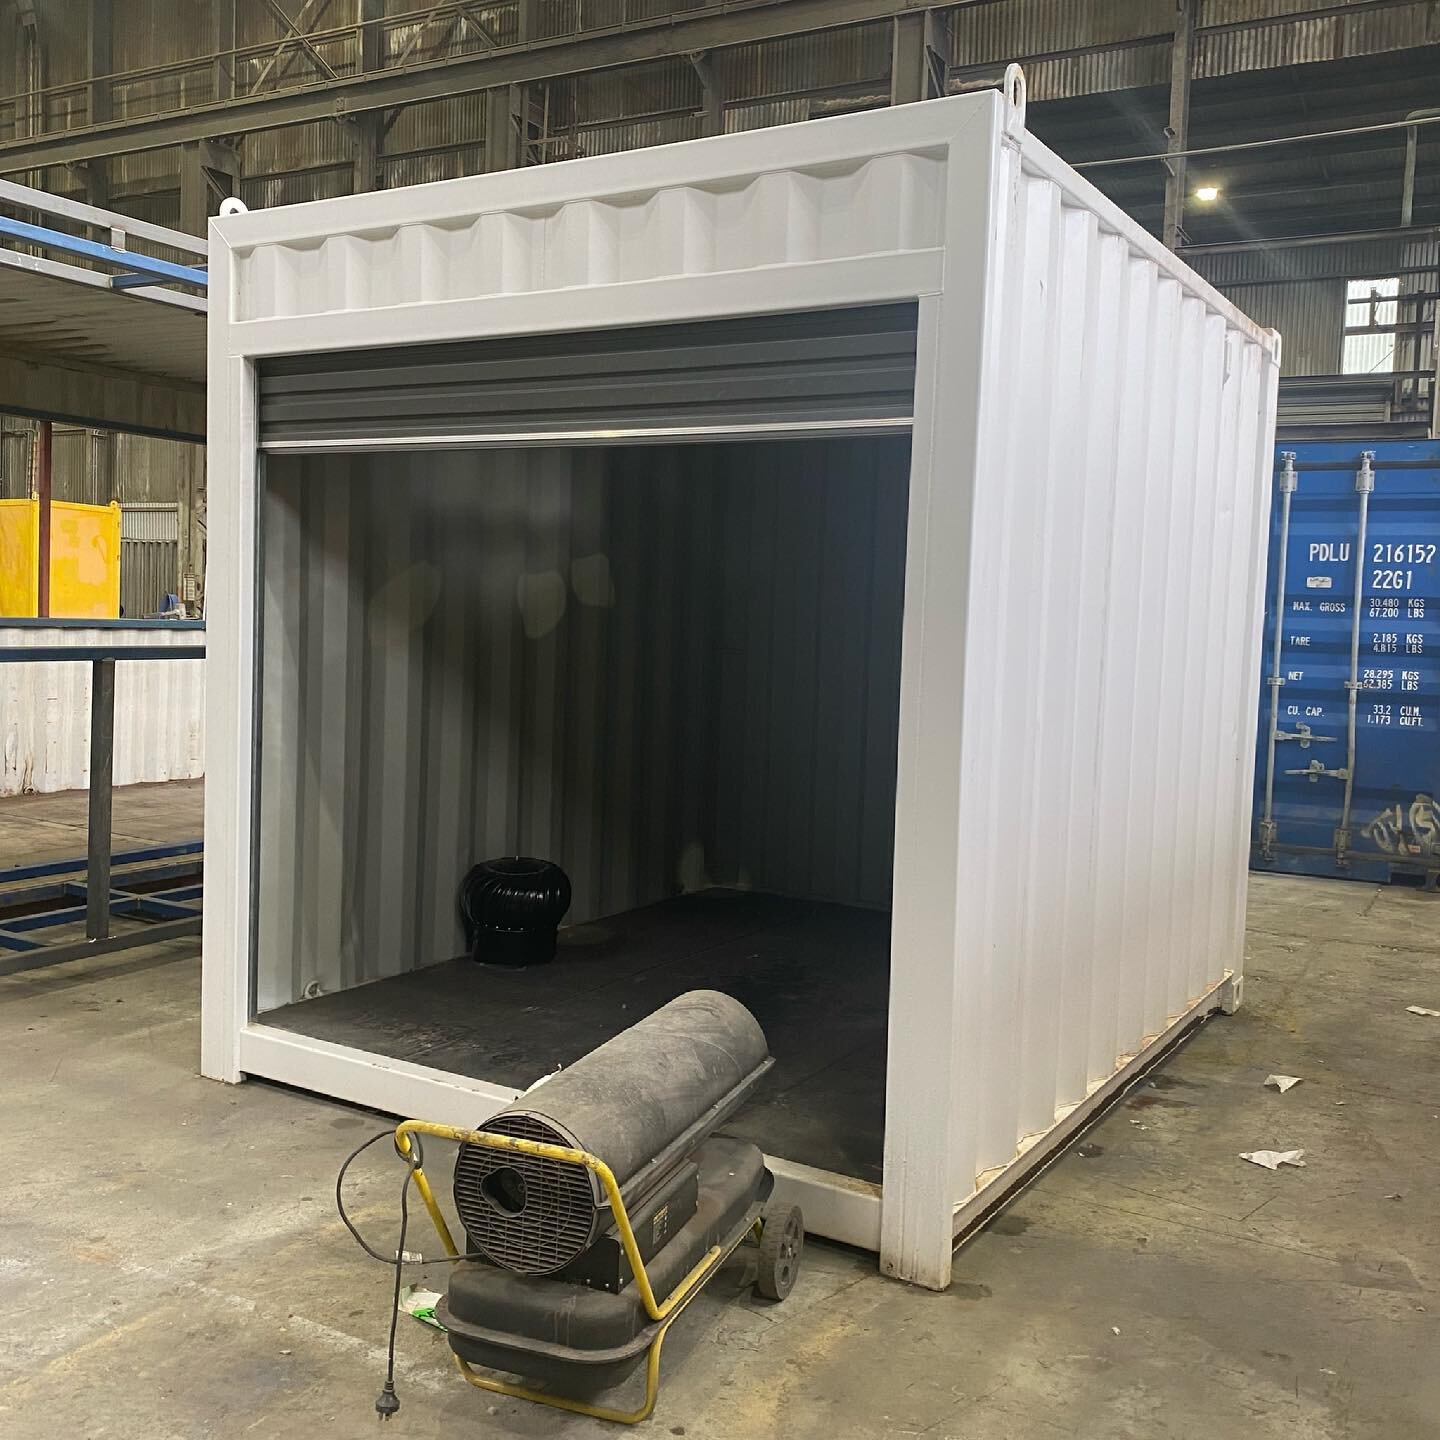 Heat is on 🌤
#10ftshippingcontainer